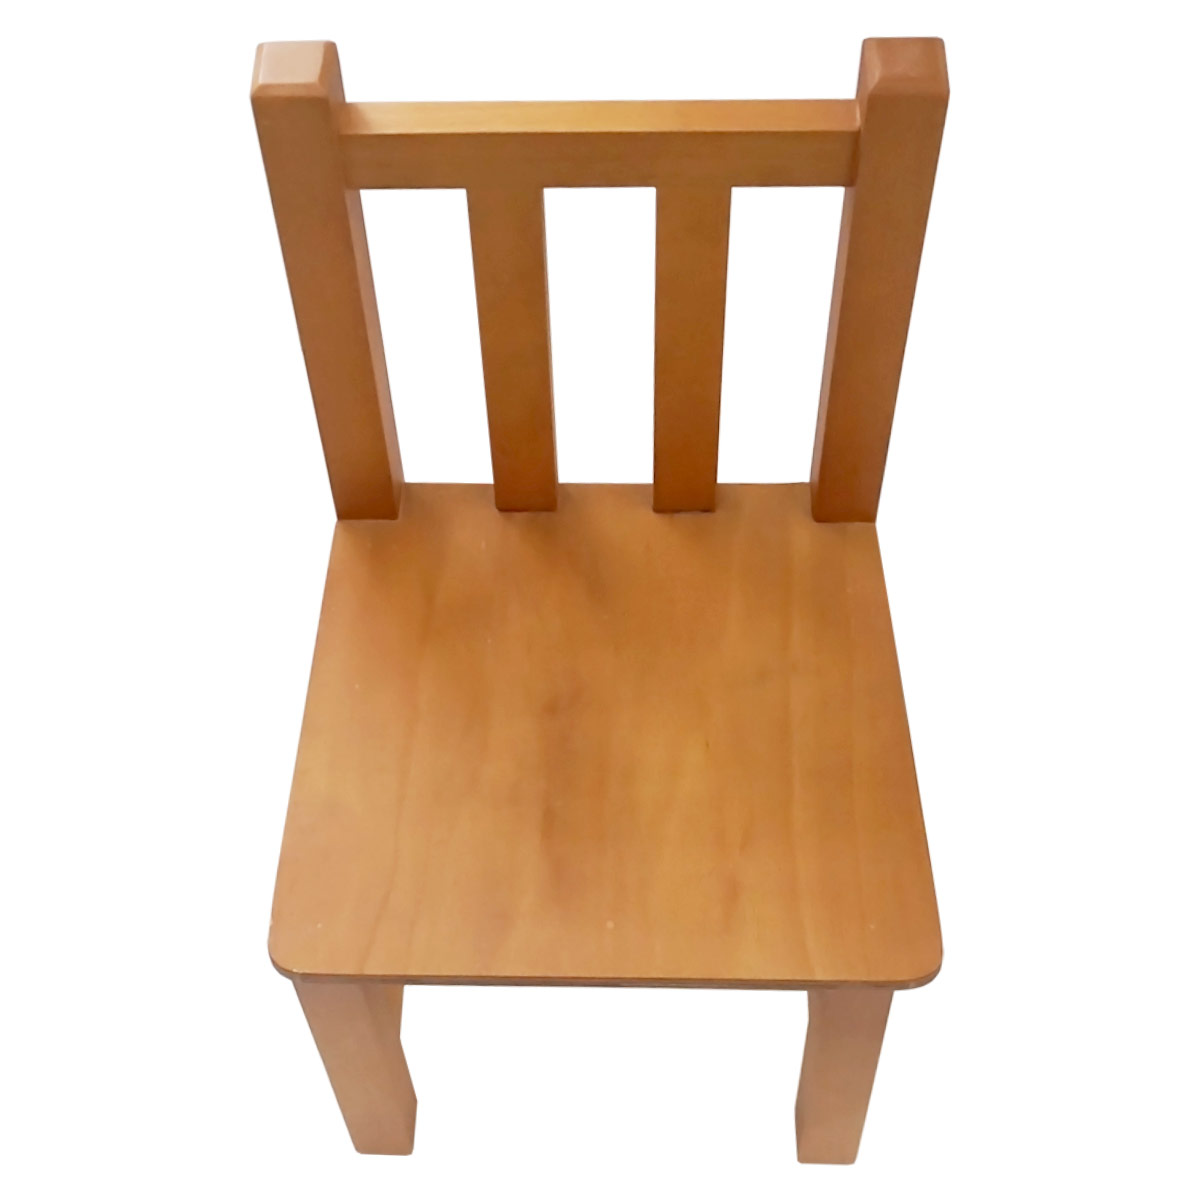 Small Chair Polished Without Arms Premium Montessori Materials